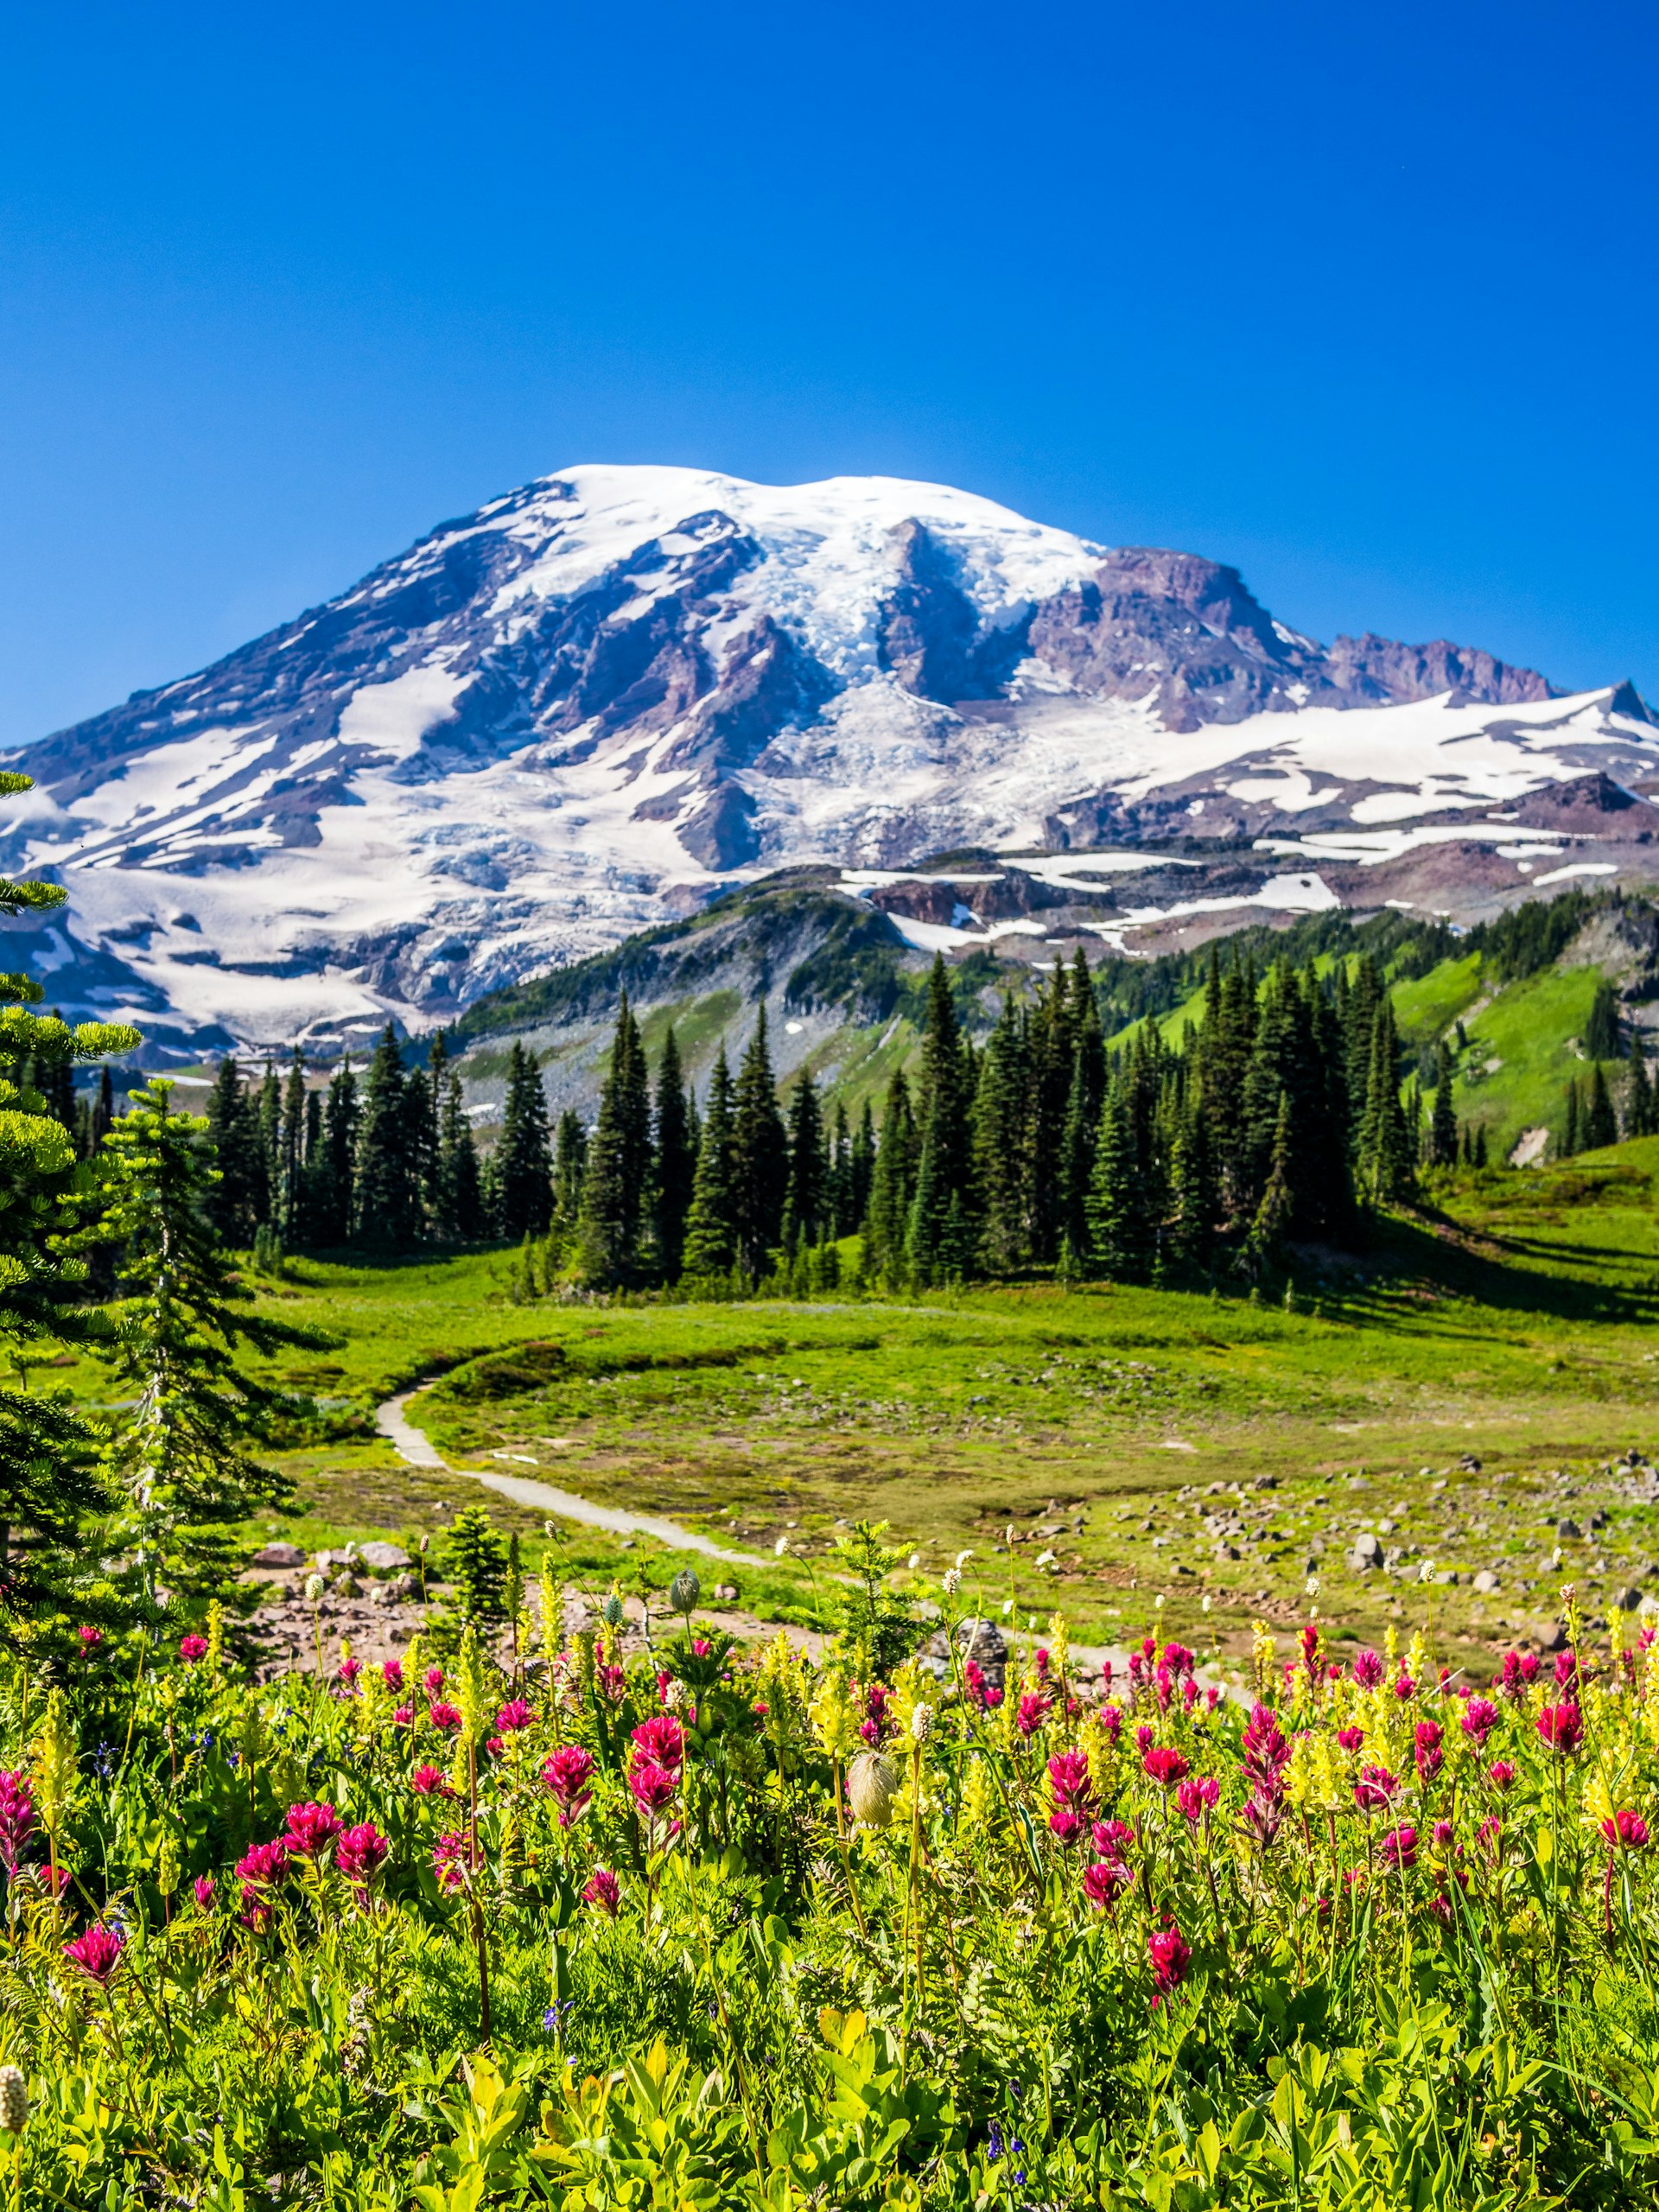 Wildflowers in front of a snow-capped mountain